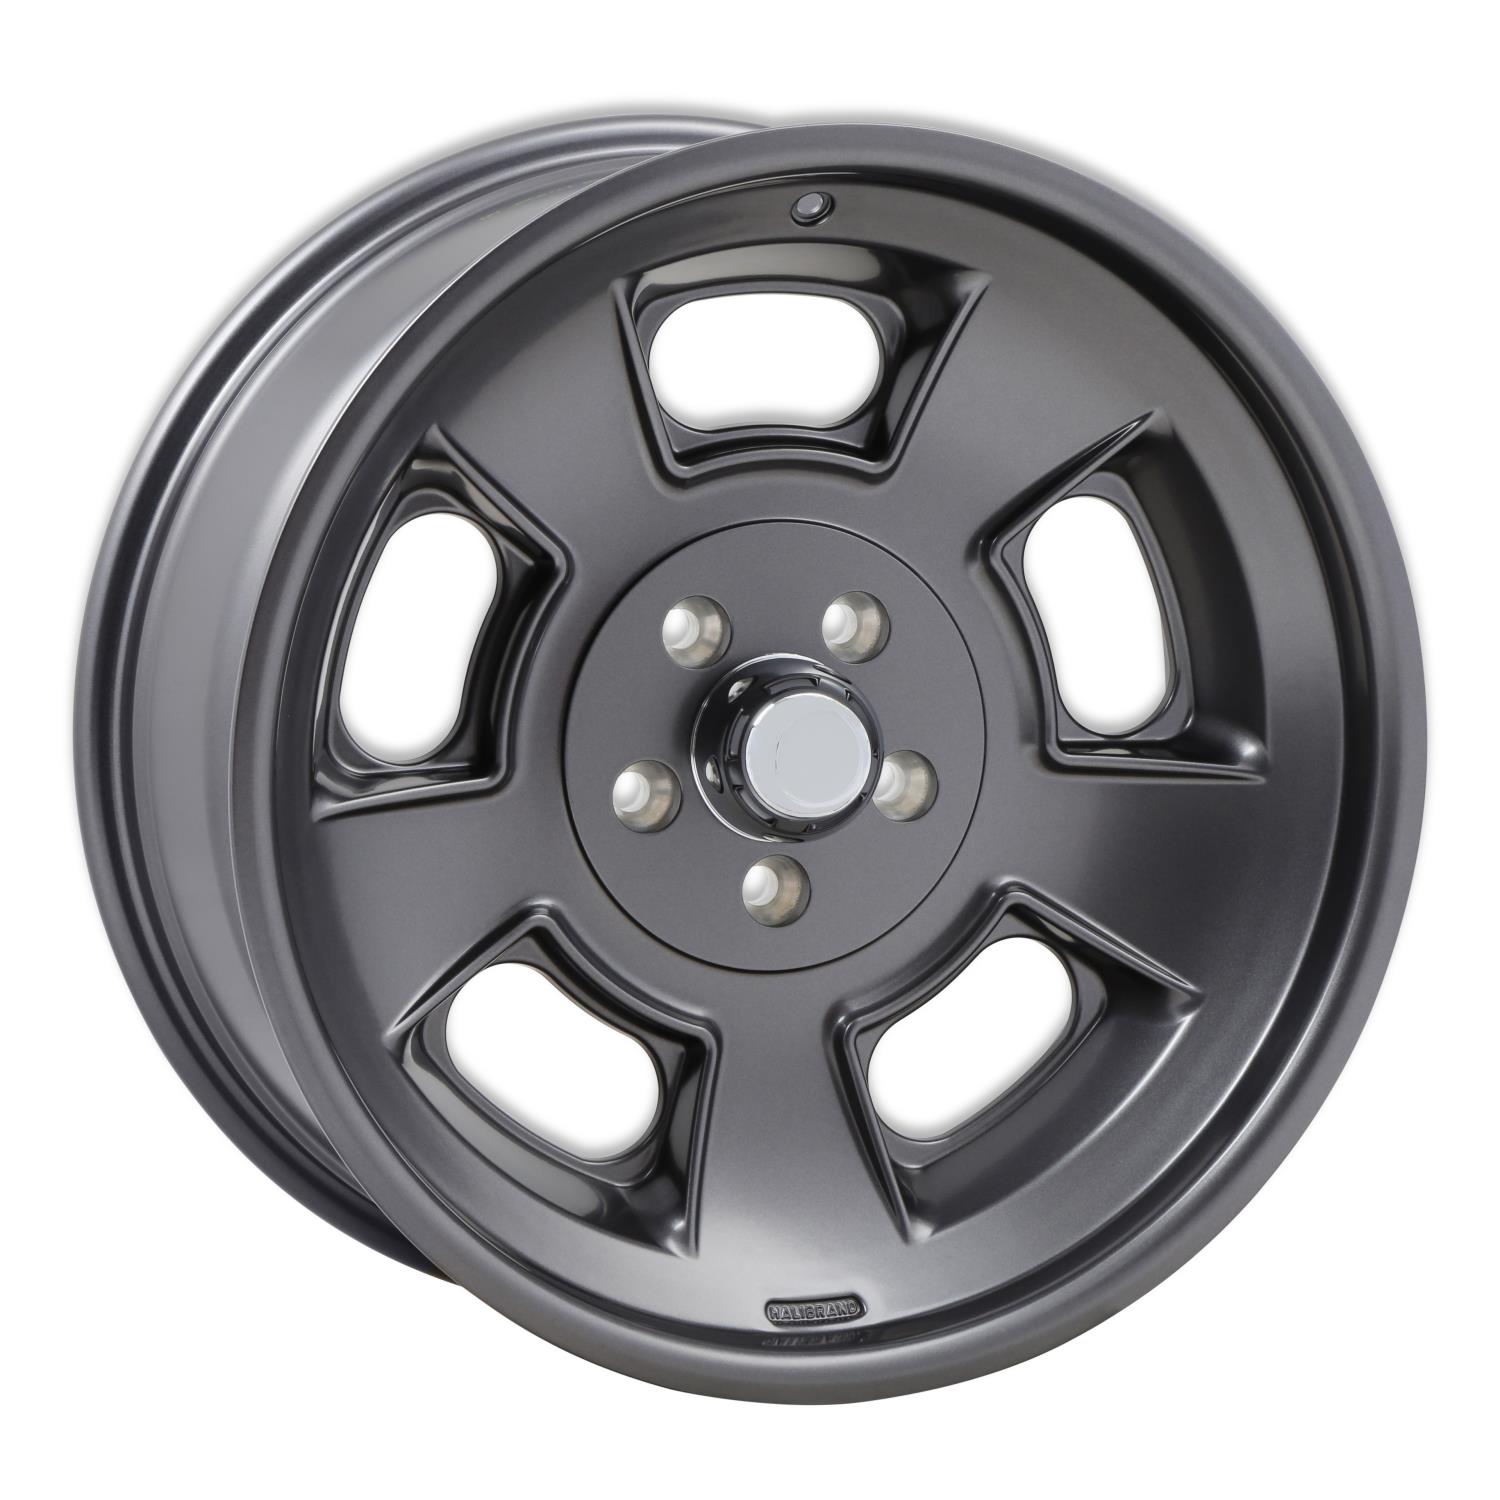 Sprint Front Wheel, Size: 20x8.5", Bolt Pattern: 5x5", Backspace: 4.75" [Anthracite - Semi Gloss Clearcoat]